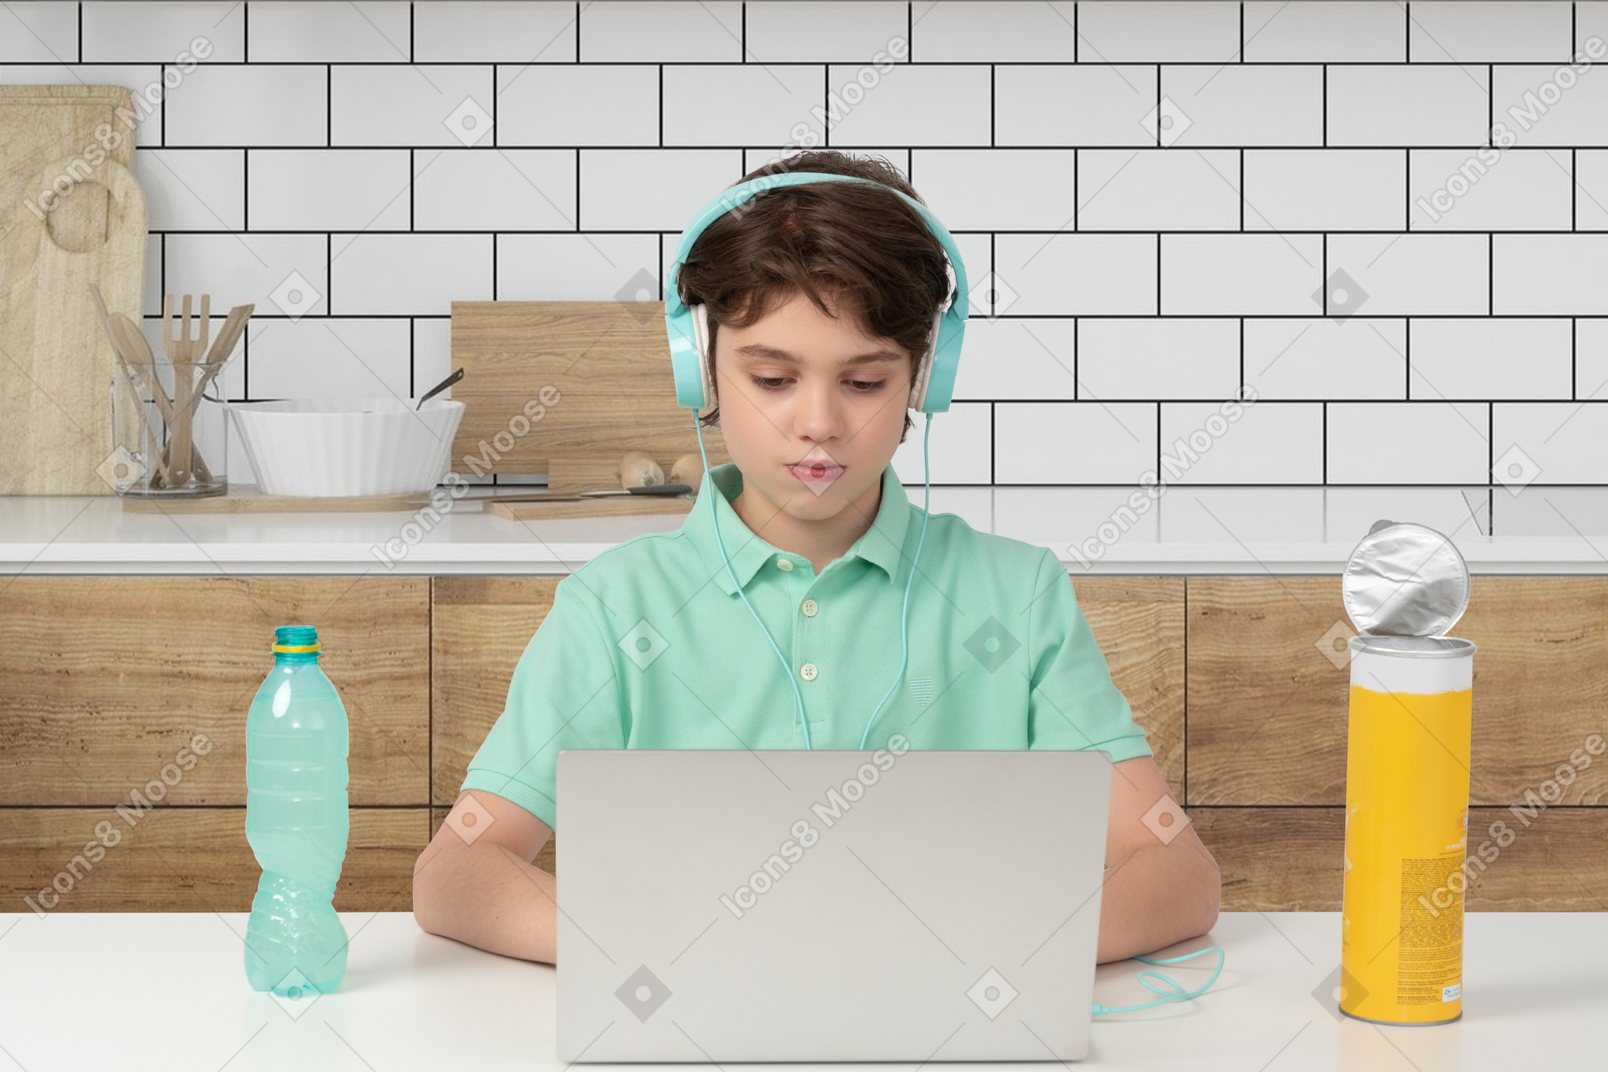 A boy wearing headphones sitting at a table using a laptop